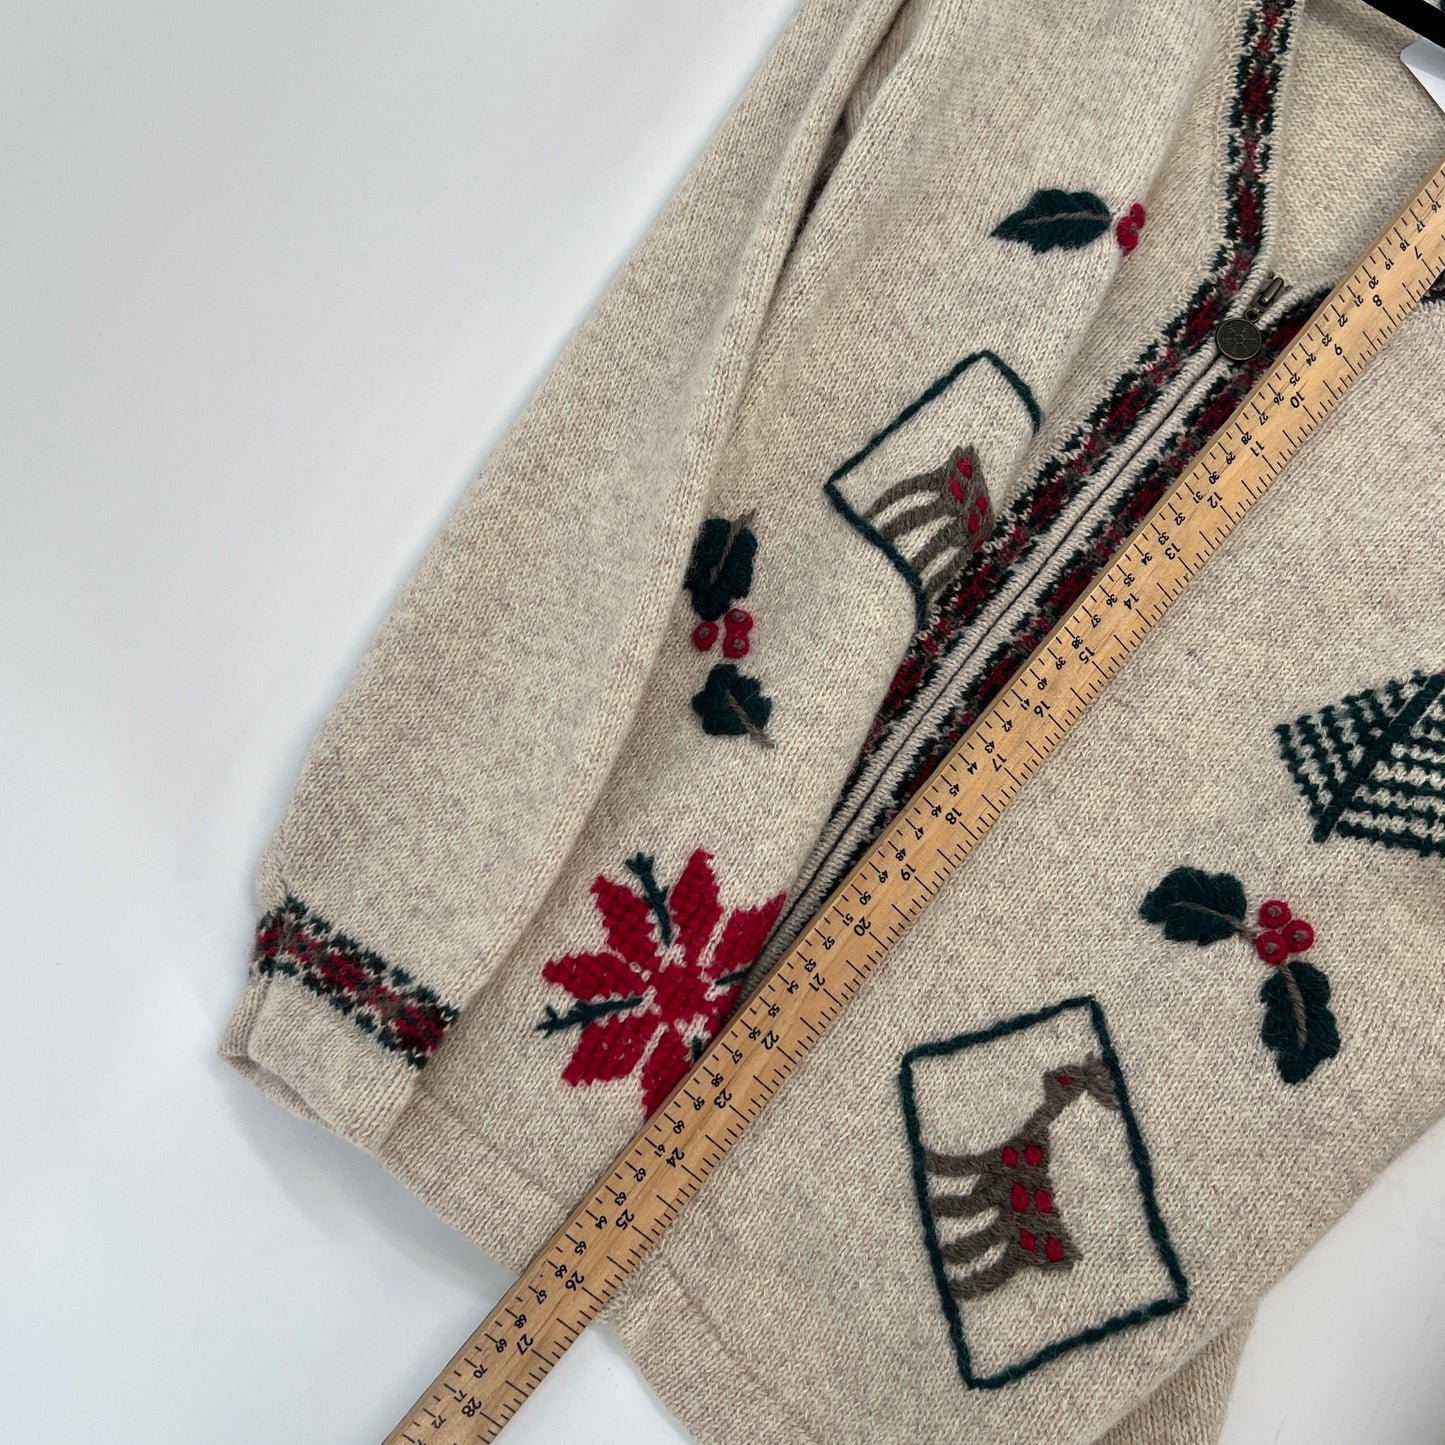 SOLD. Vintage Northern Reflection Wool Christmas Cardigan L